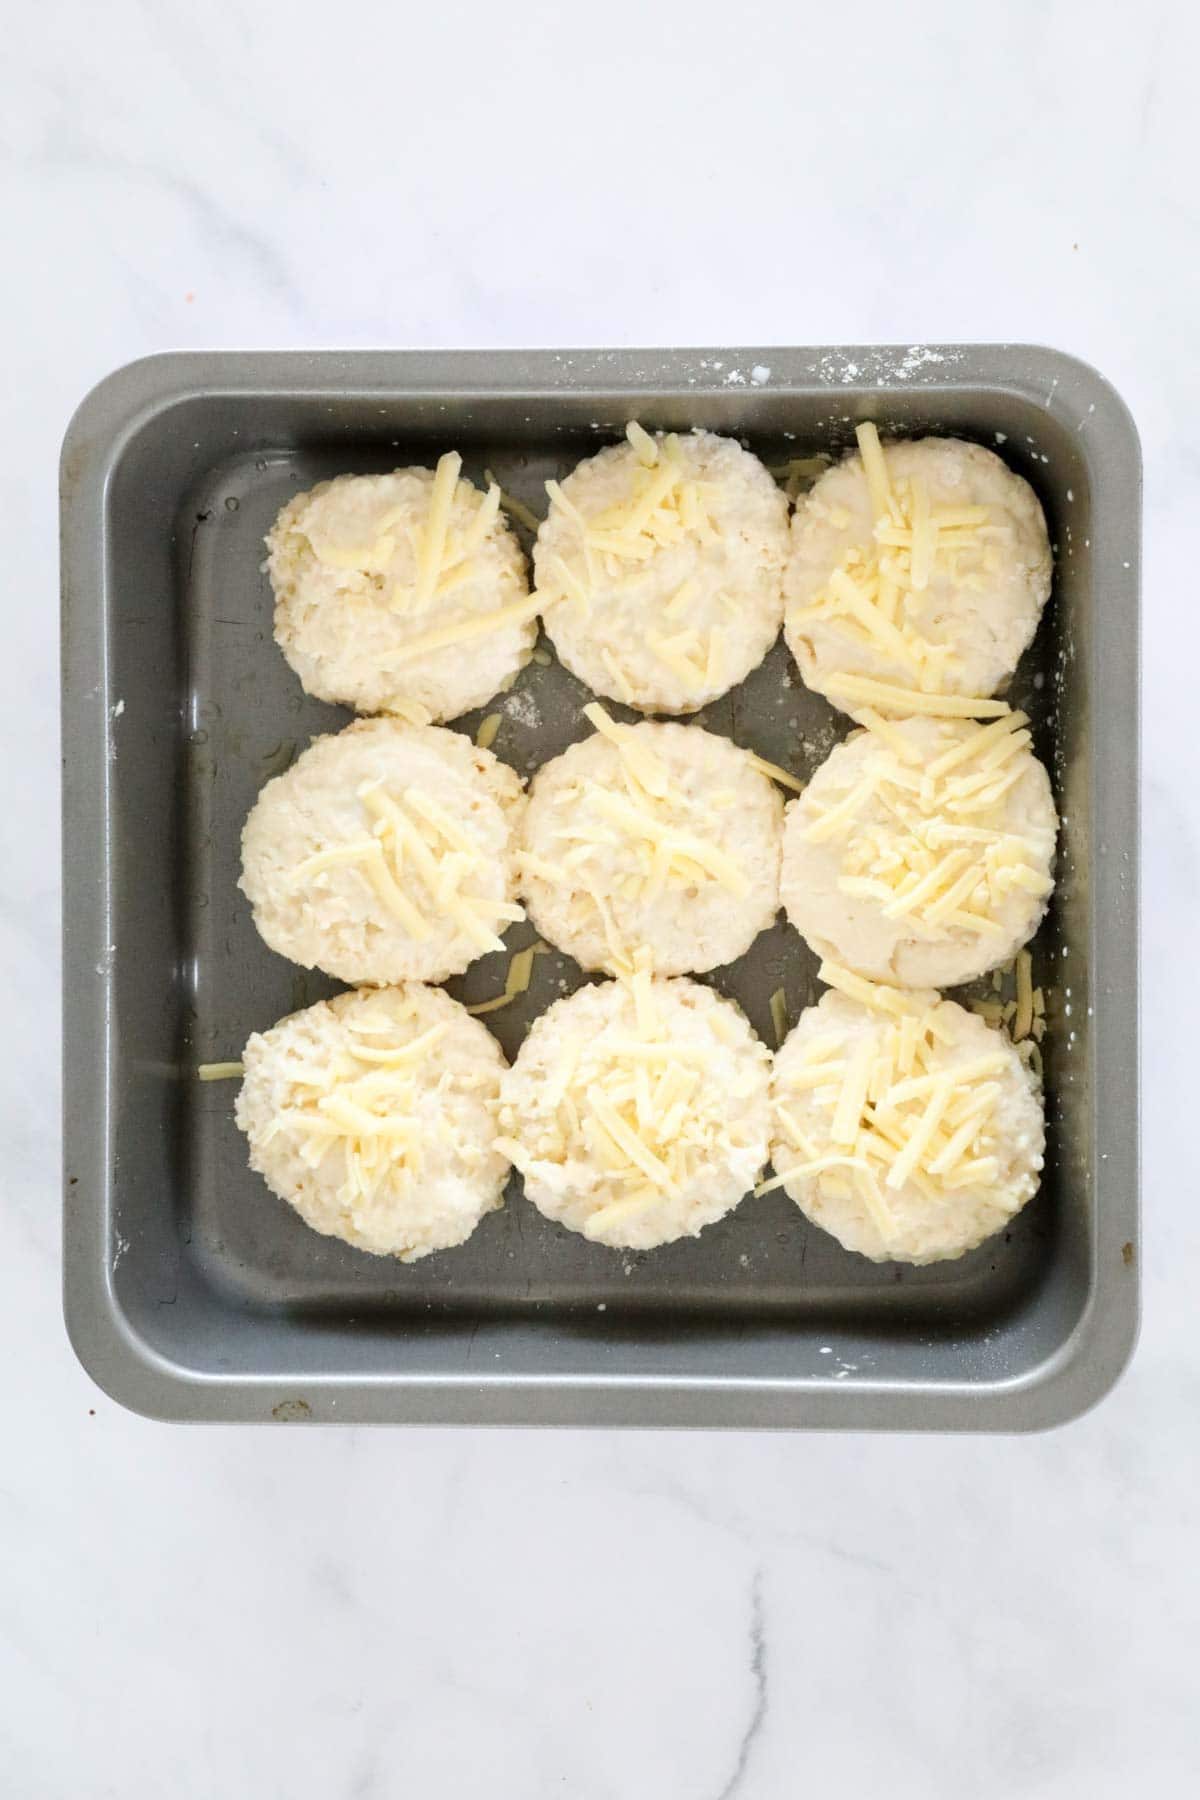 Cheese scones placed together in a square cake tin and sprinkled with a little grated cheese.